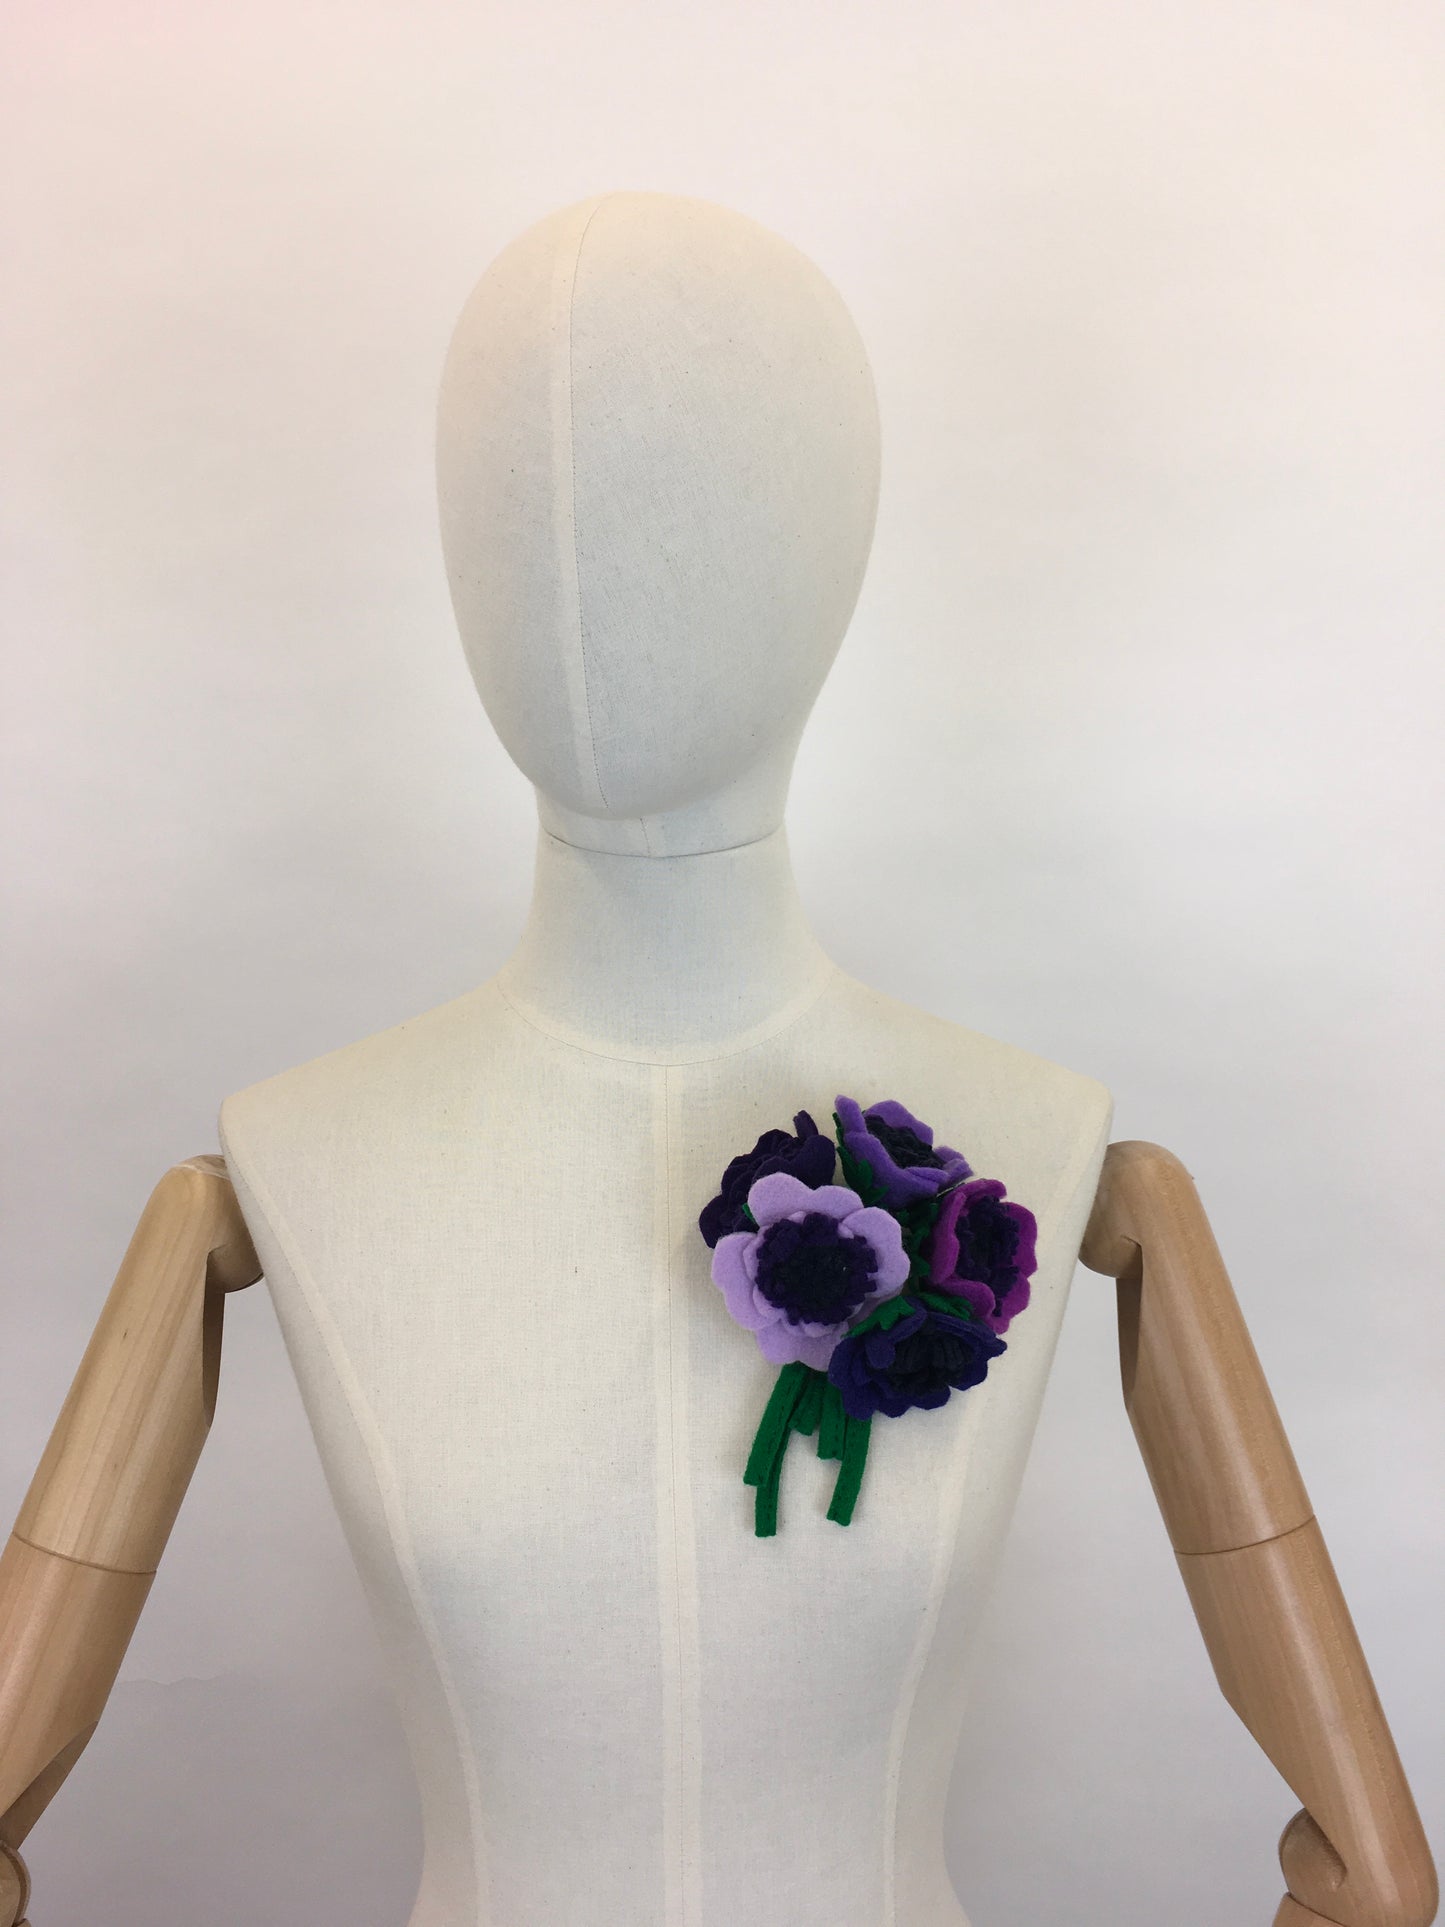 Reproduction Vintage 1940’s Make Do and Mend Floral Corsage - In Rich Purples and Greens